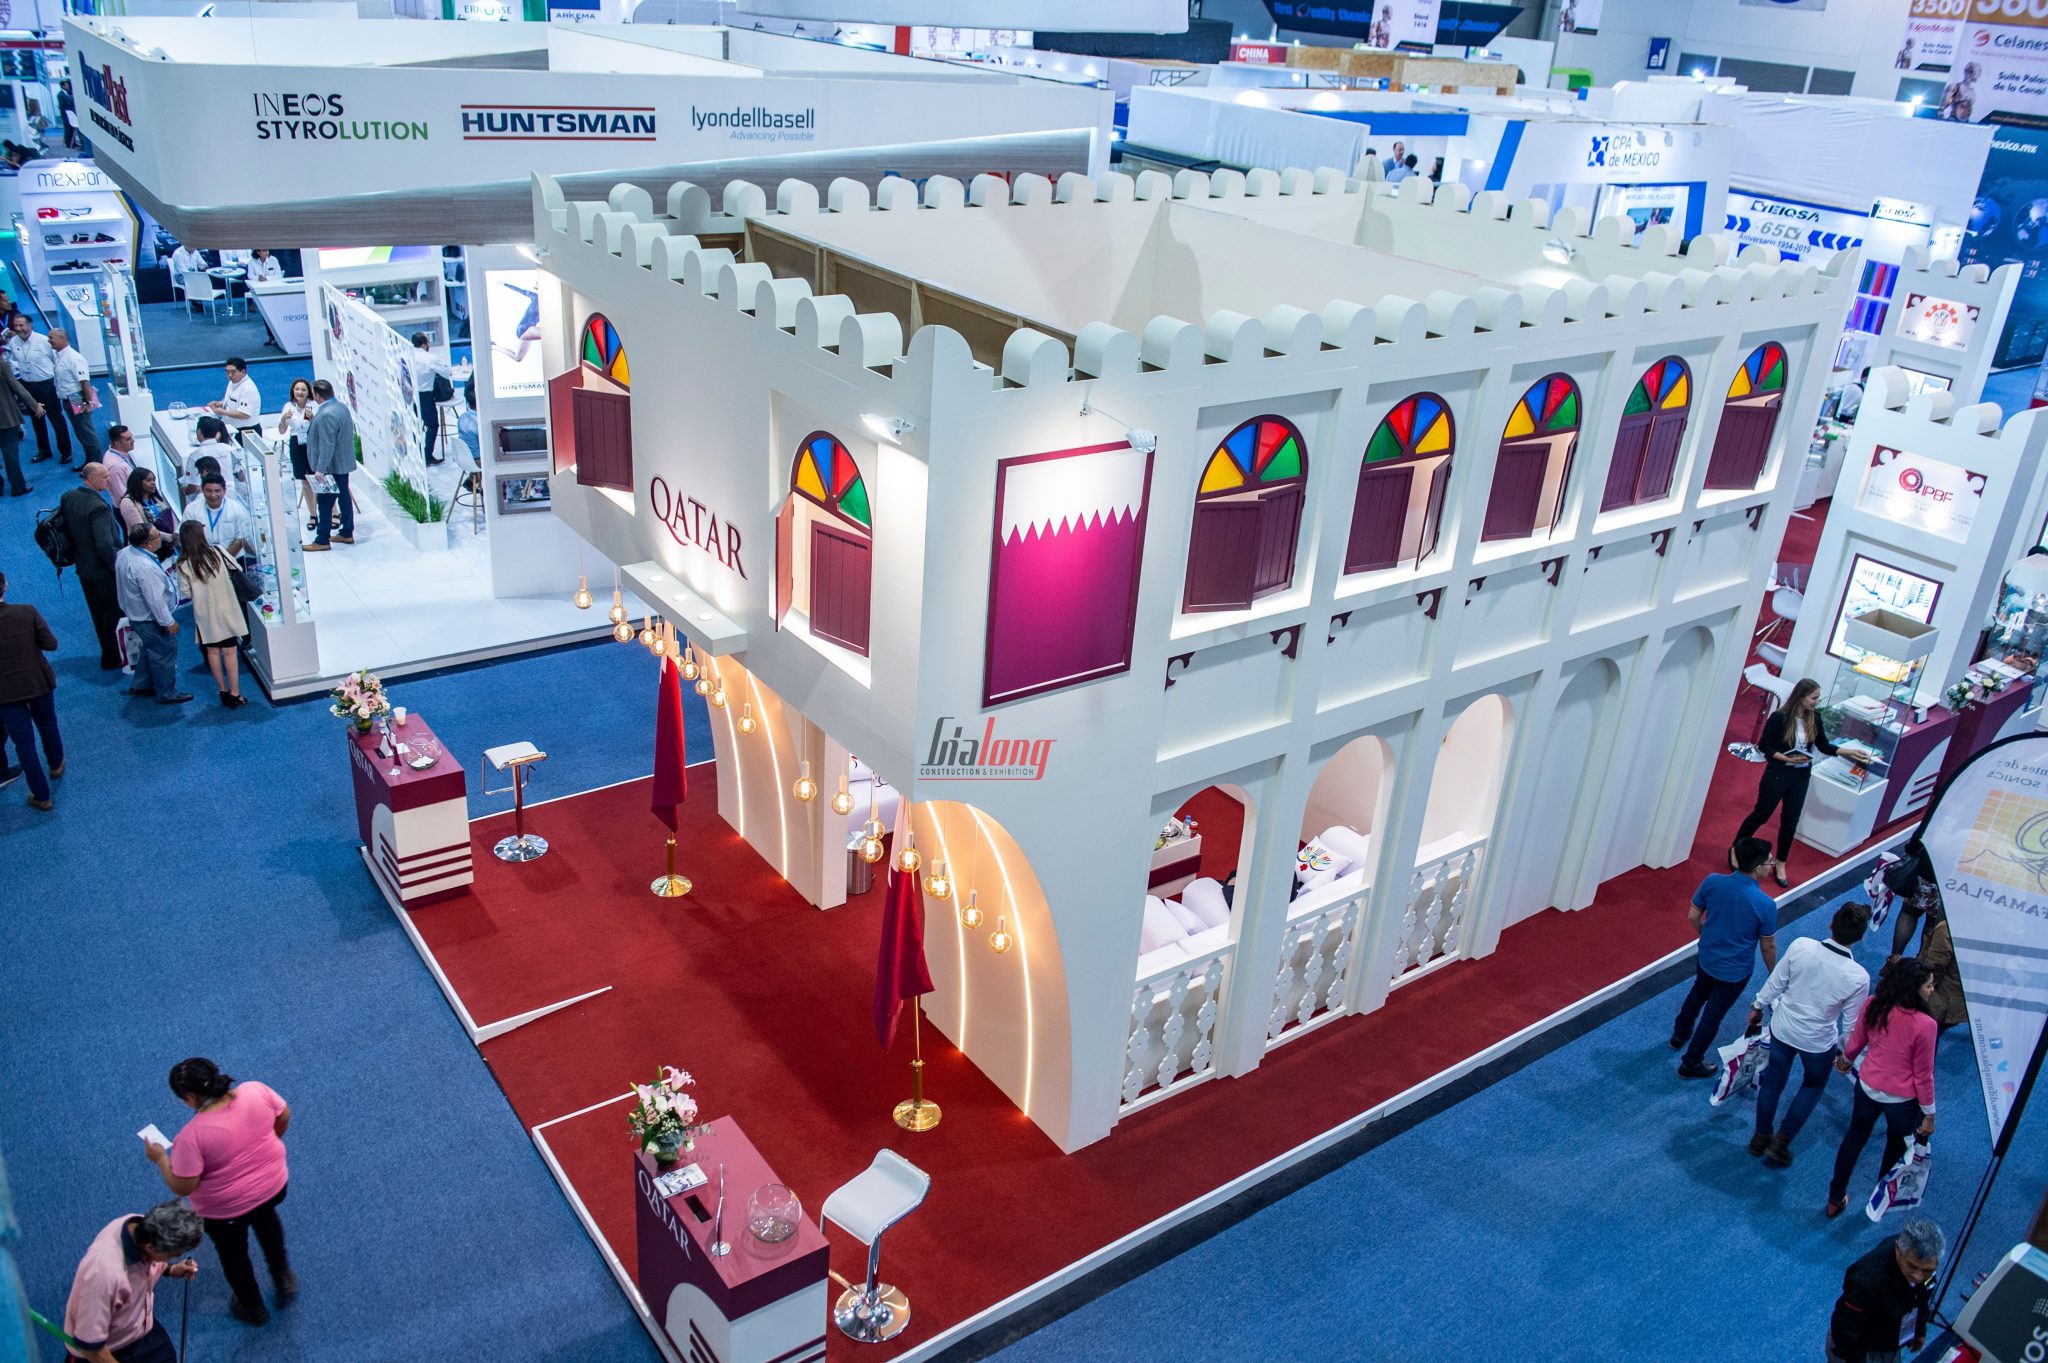 The design and construction of the booth by Gia Long